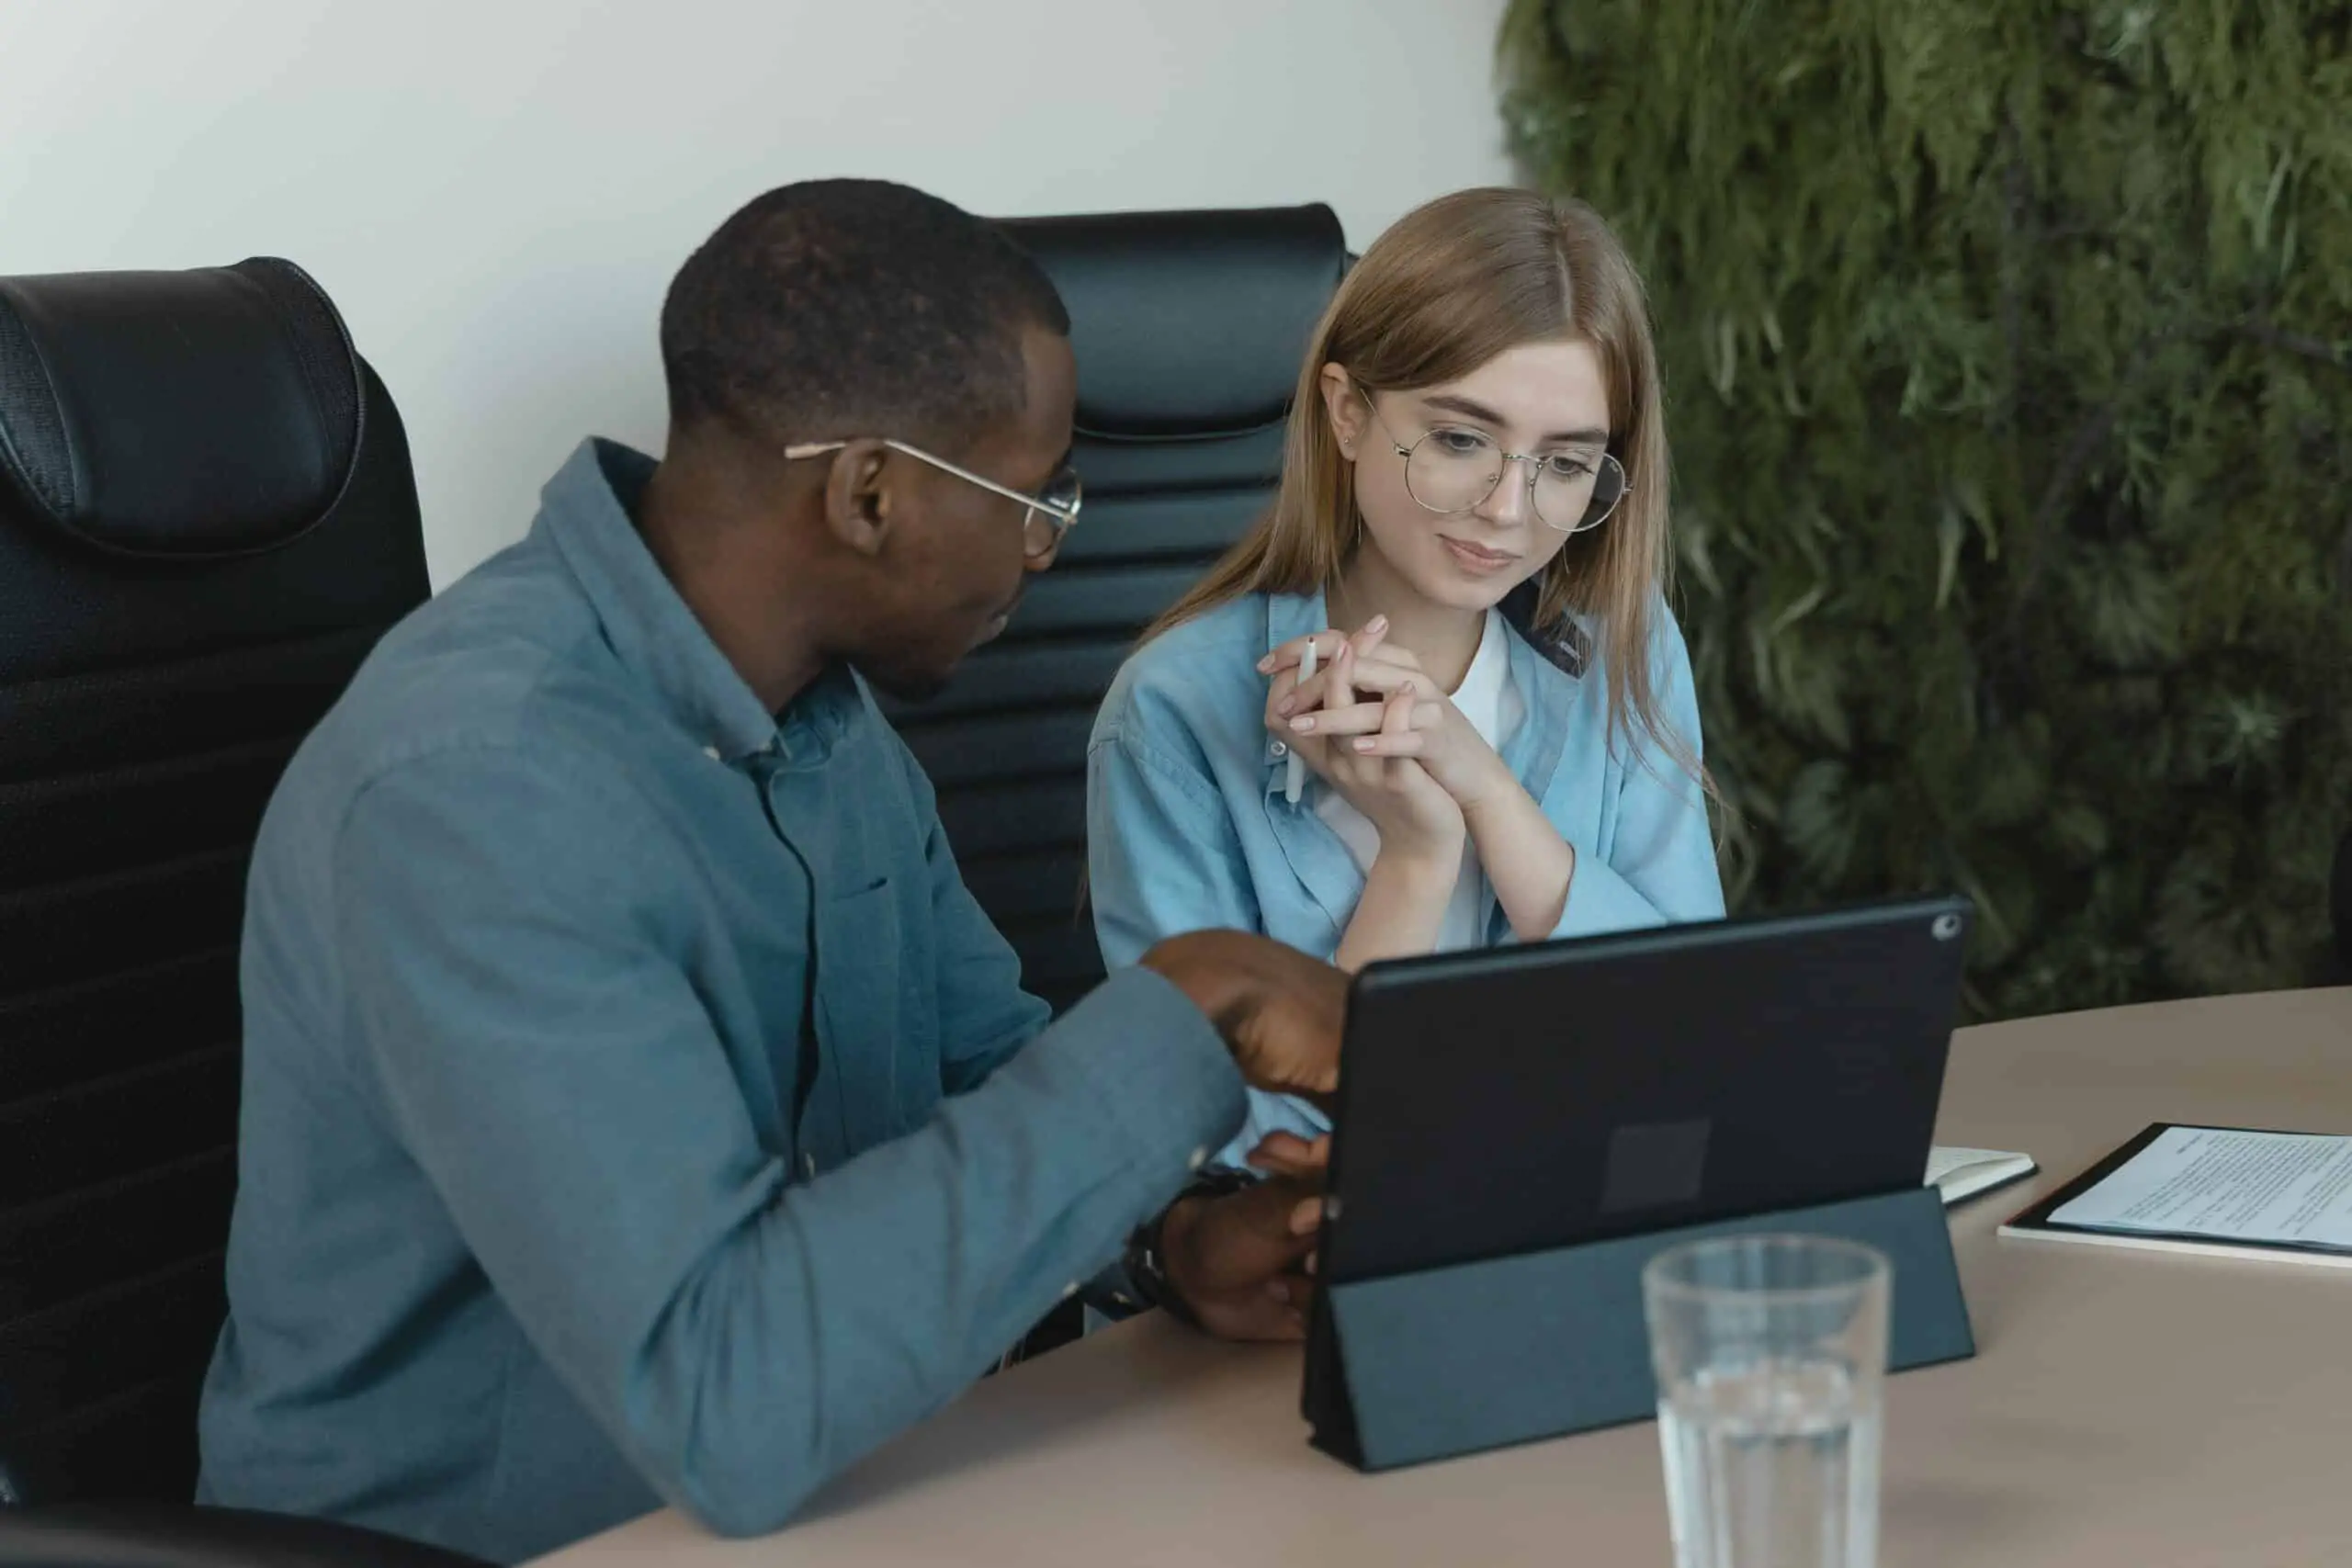 Man teaching a woman sitting in front of a Microsoft Surface